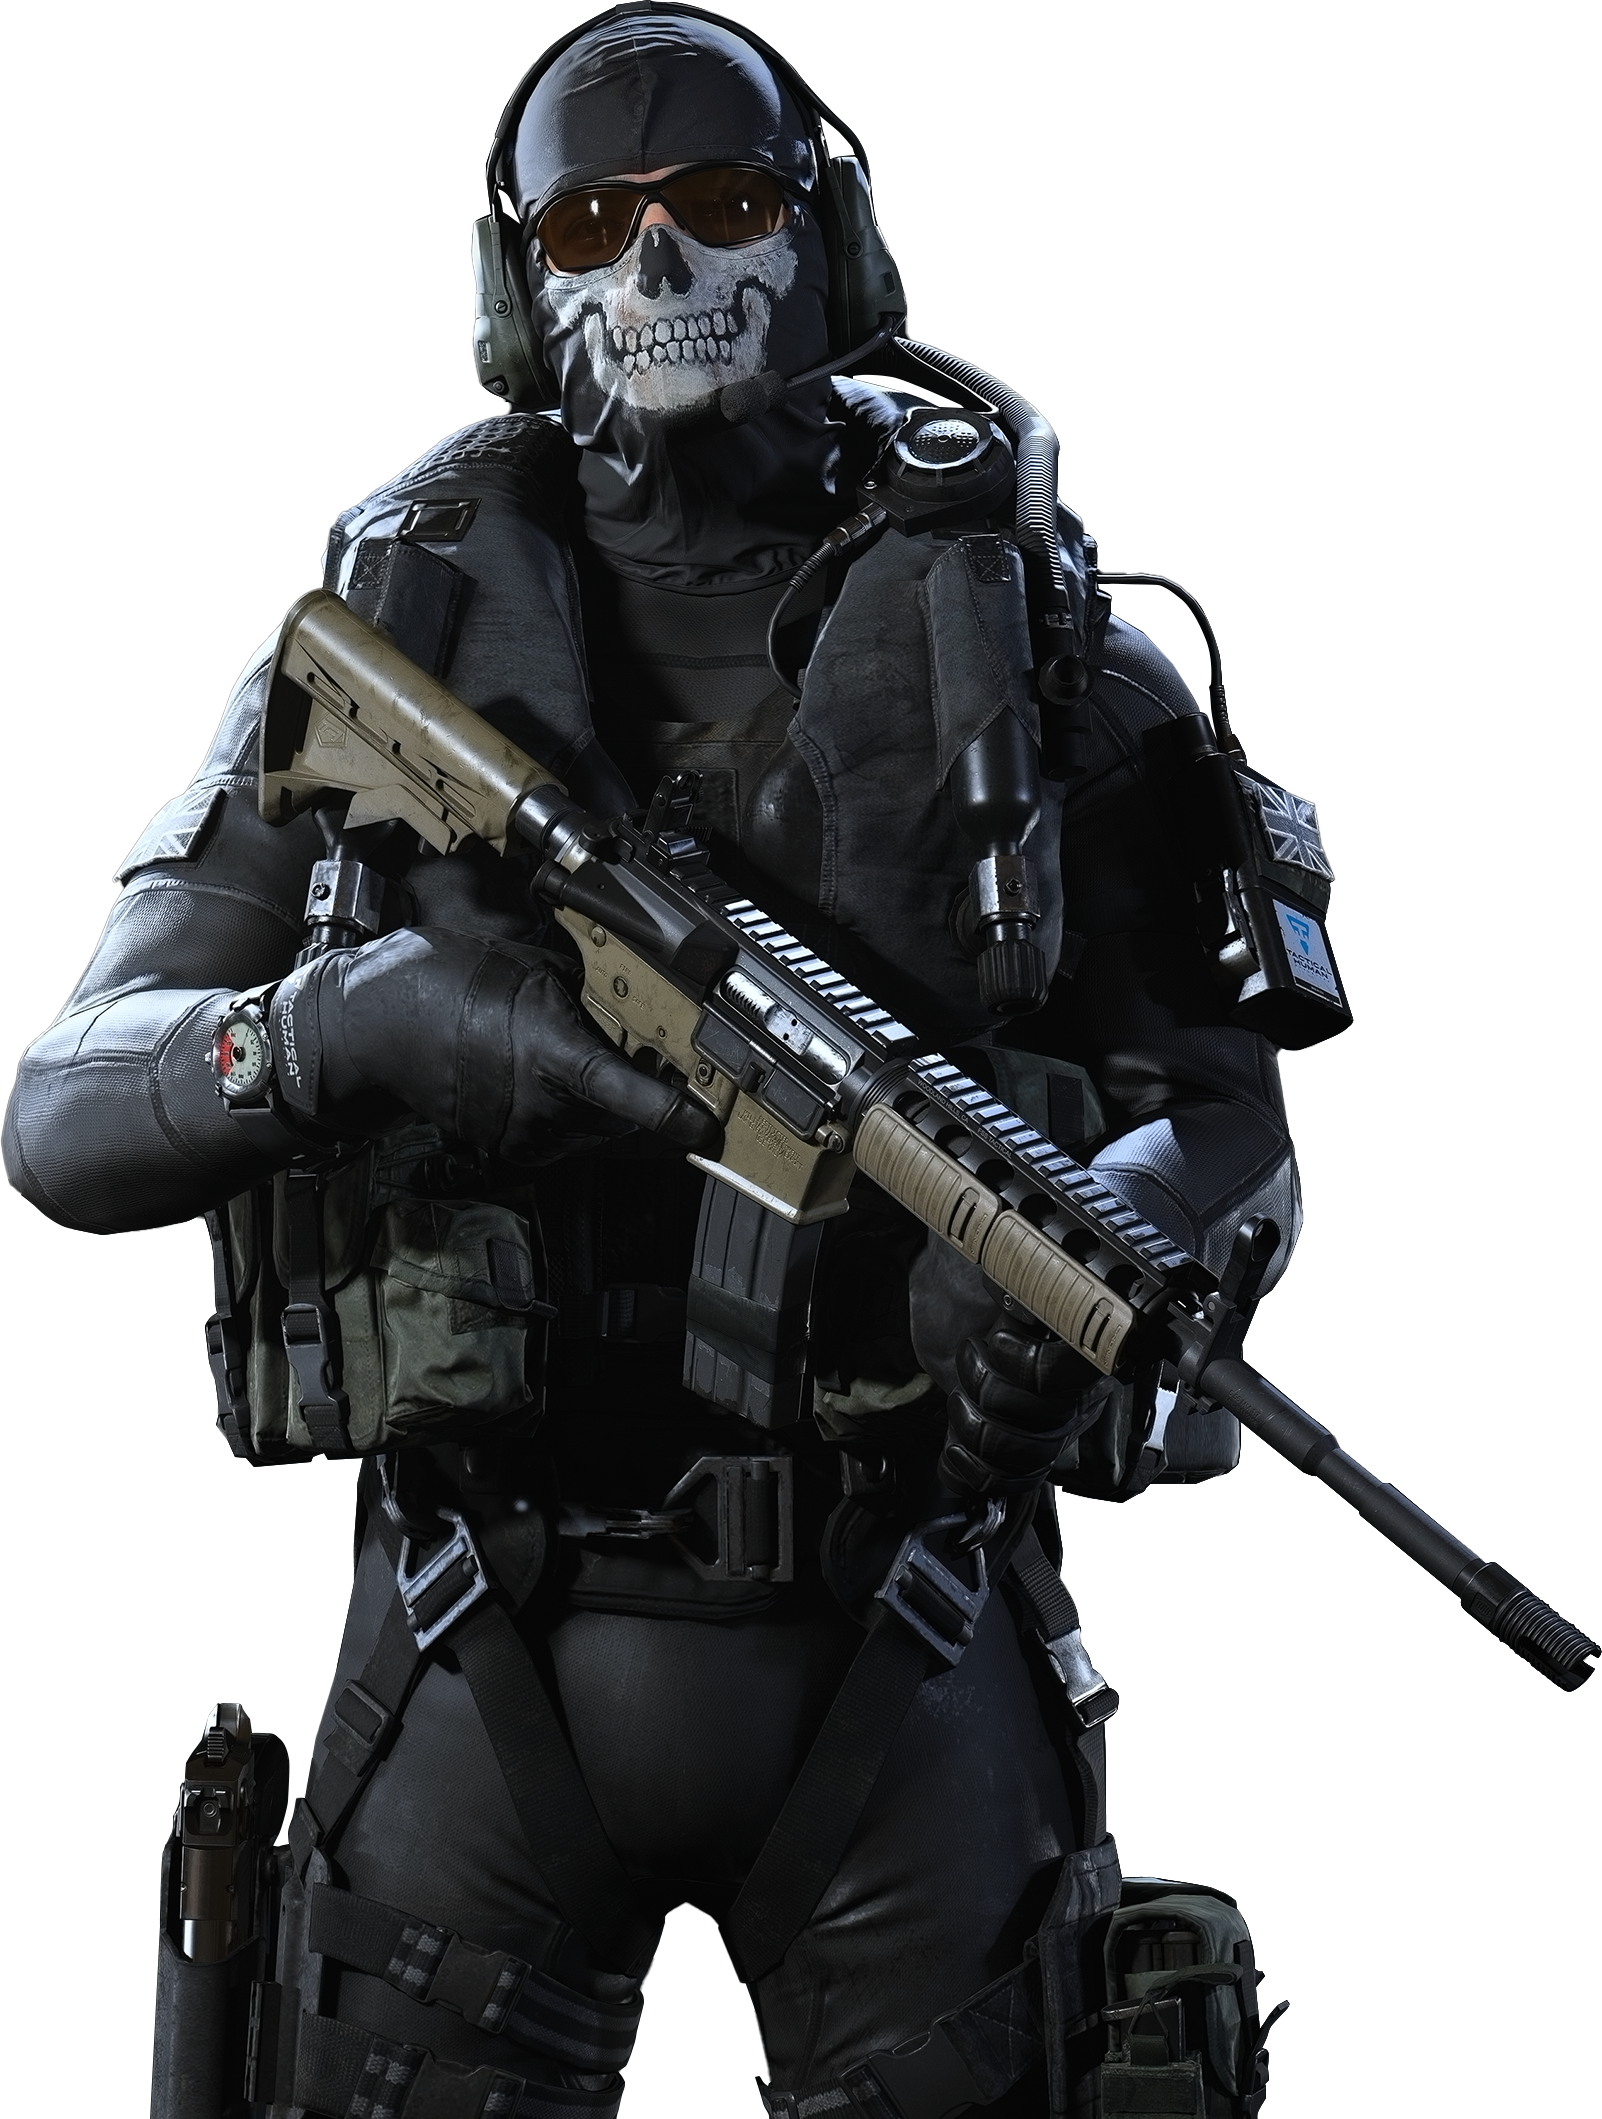 UDT Ghost from Call of Duty Render by Pavseh on DeviantArt